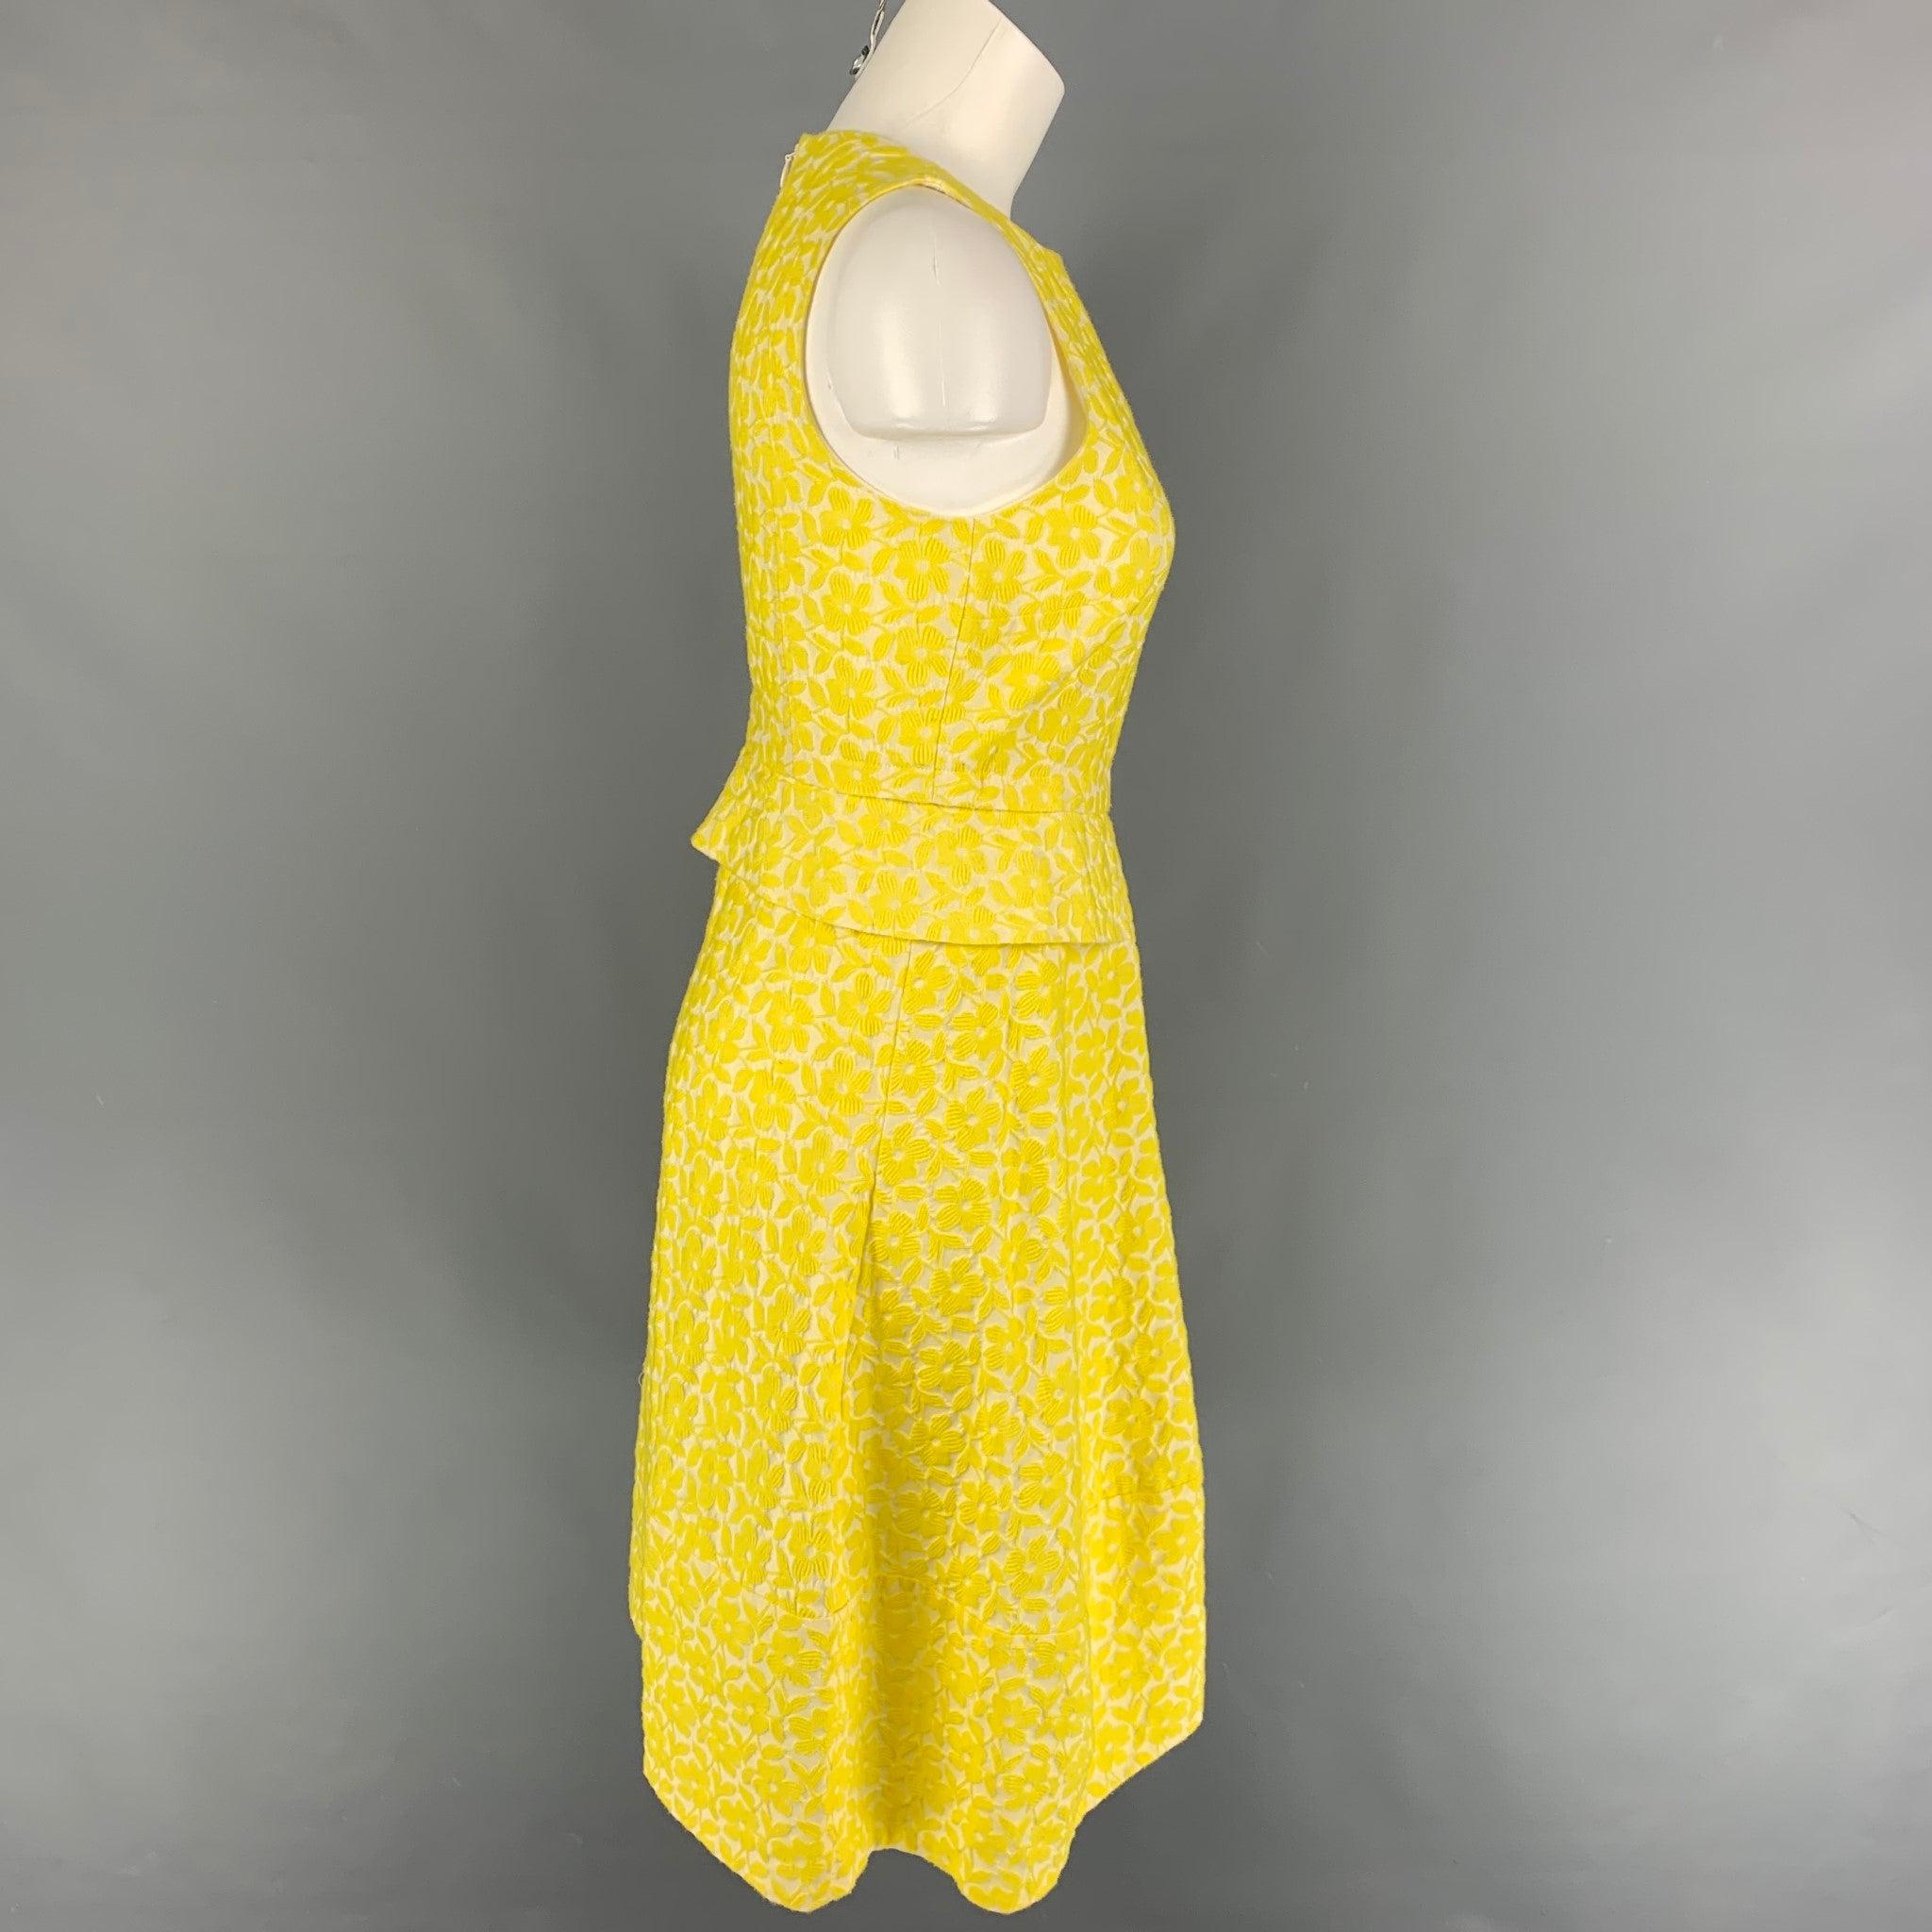 JIL SANDER dress comes in a yellow & white jacquard cotton blend featuring a a-line style, sleeveless, front panel detail, and a back zip up closure. Made in Italy.
Very Good
Pre-Owned Condition. 

Marked:   34 

Measurements: 
 
Shoulder: 11.5